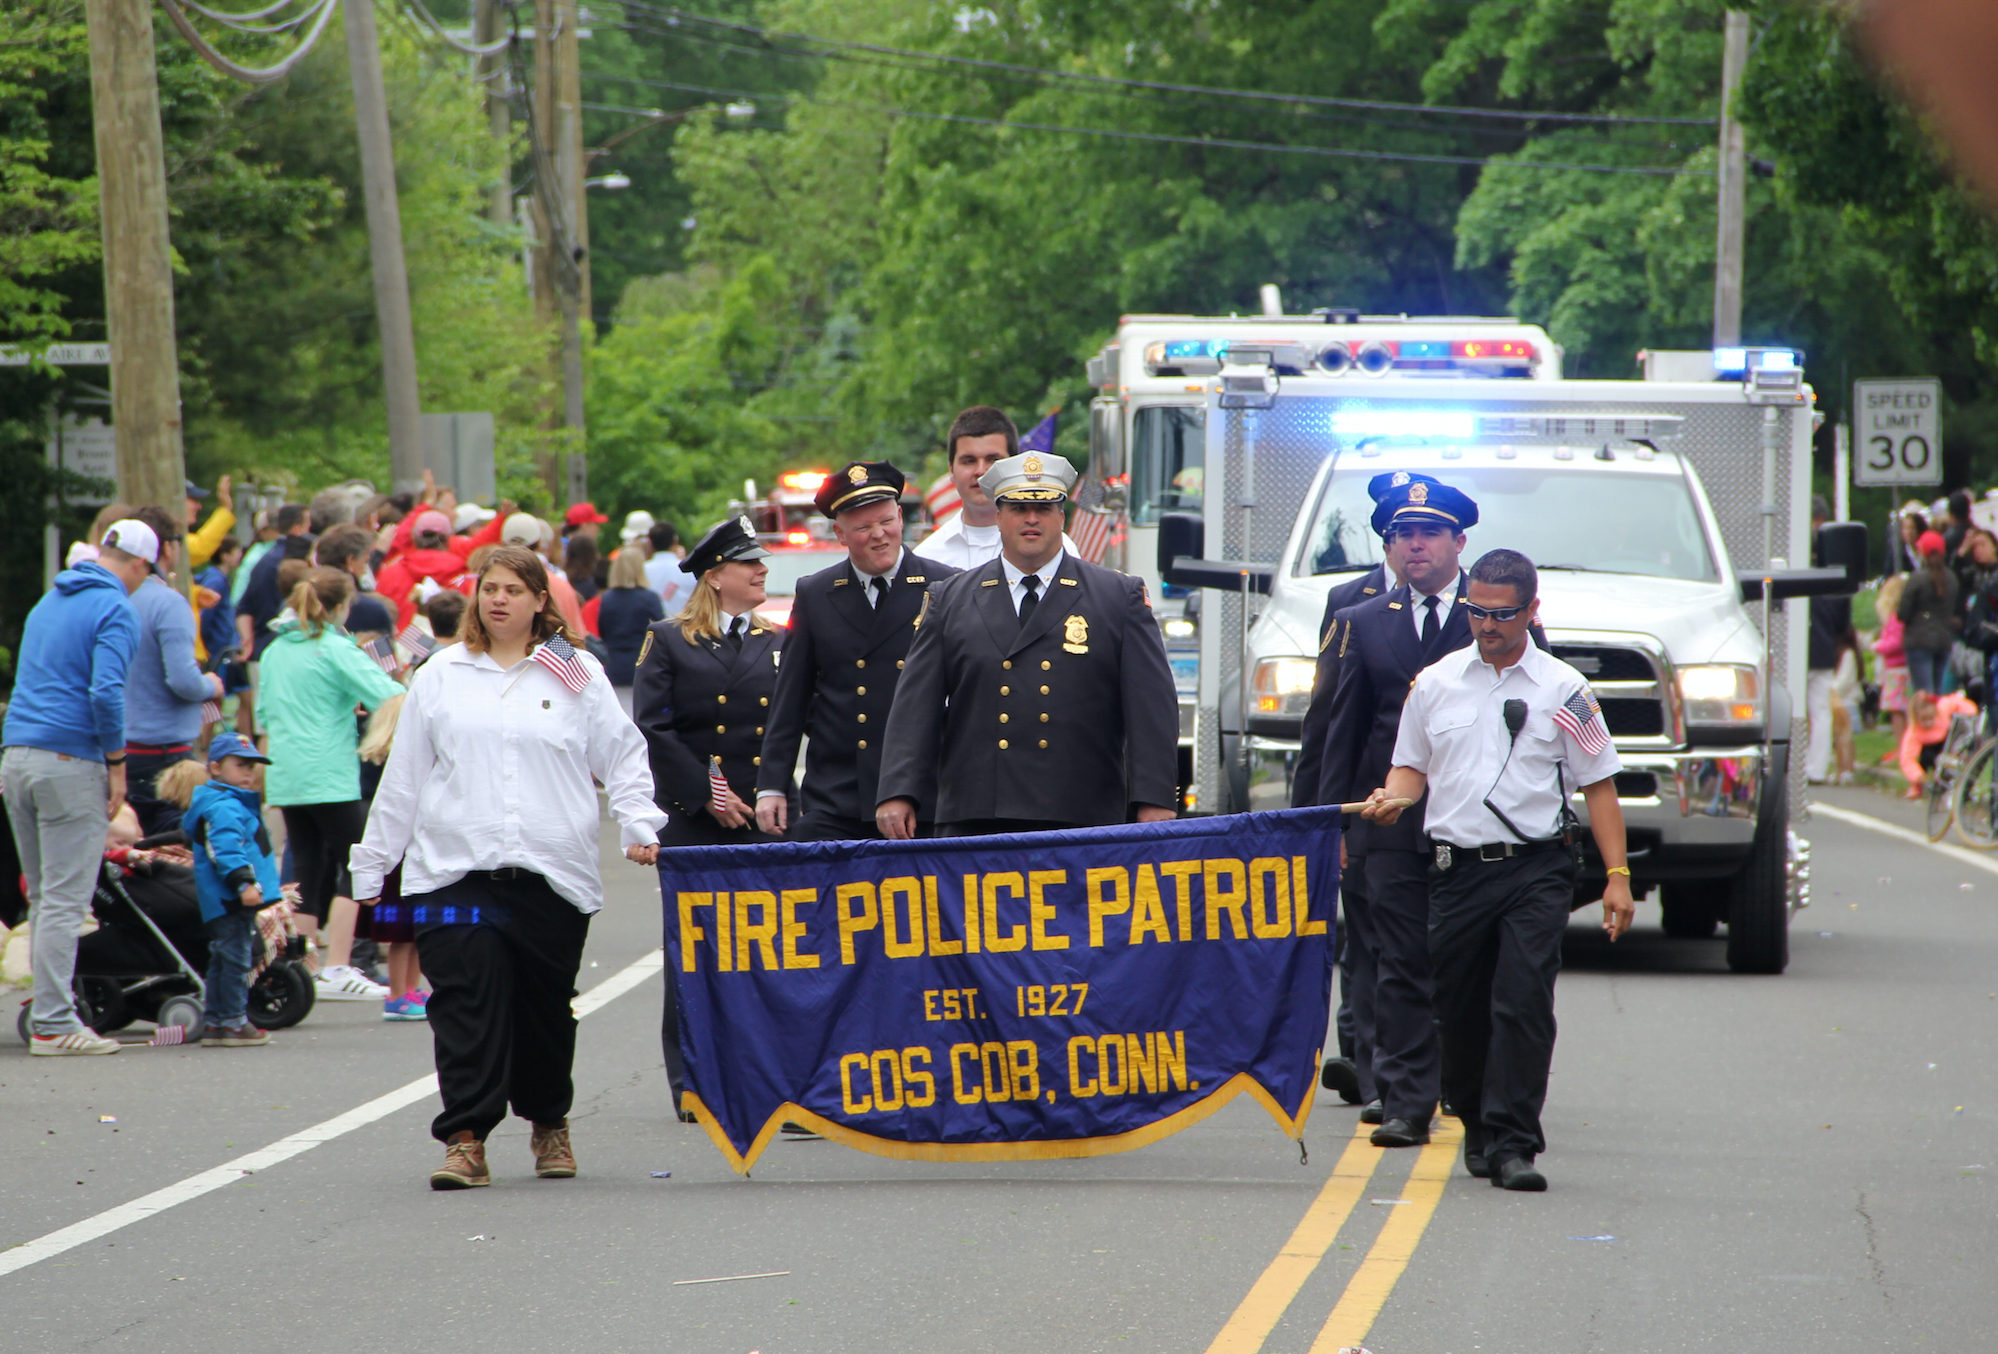 Old Greenwich Memorial Day Parade, May 29, 2017 Photo: Leslie Perry